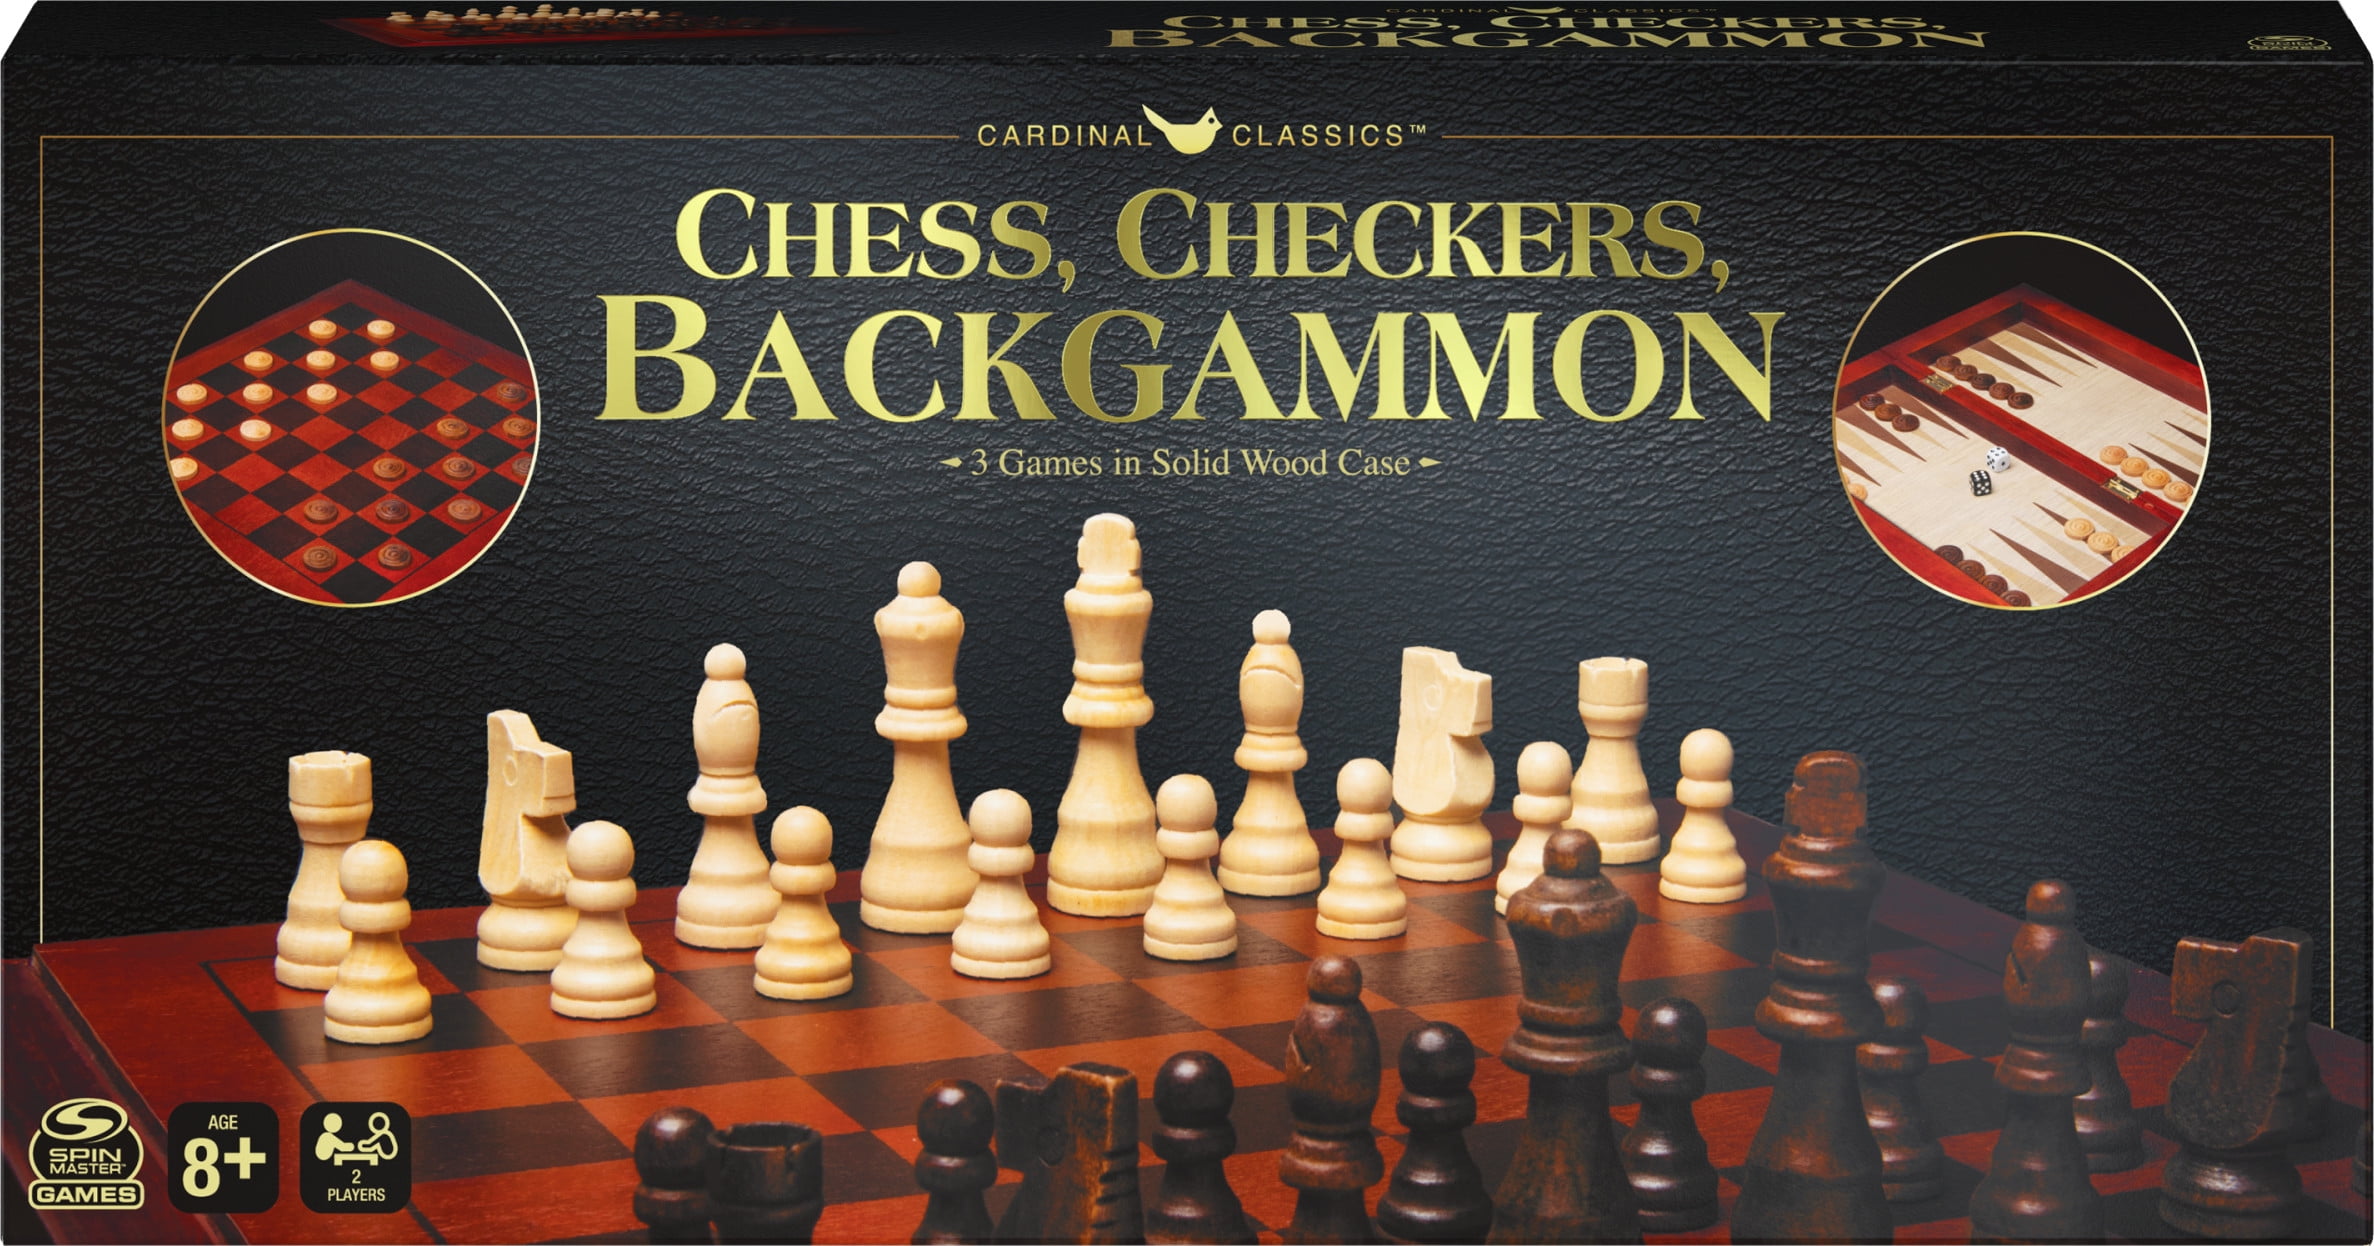 Checkers 3 Games in One FREE SHIPPING Backgammon Pressman Chess 